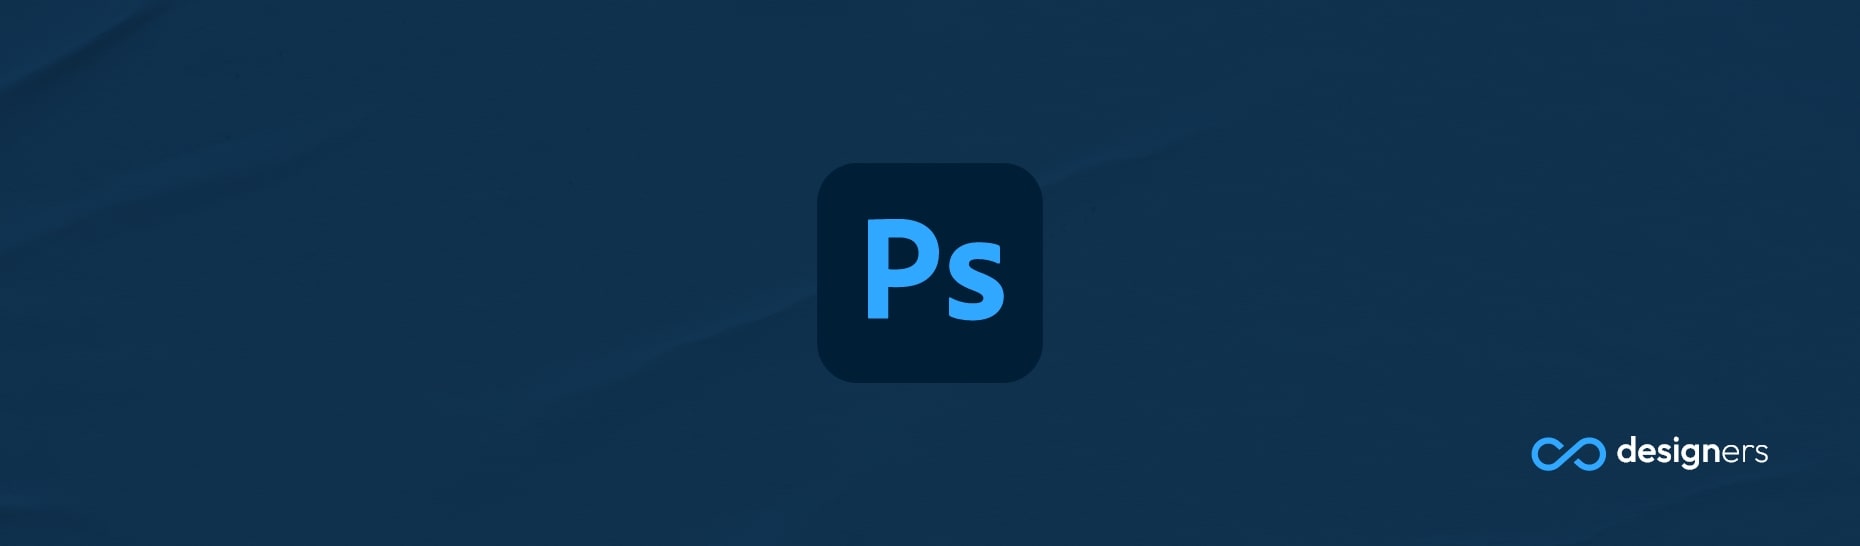 Where Can I Learn Photoshop for Free?